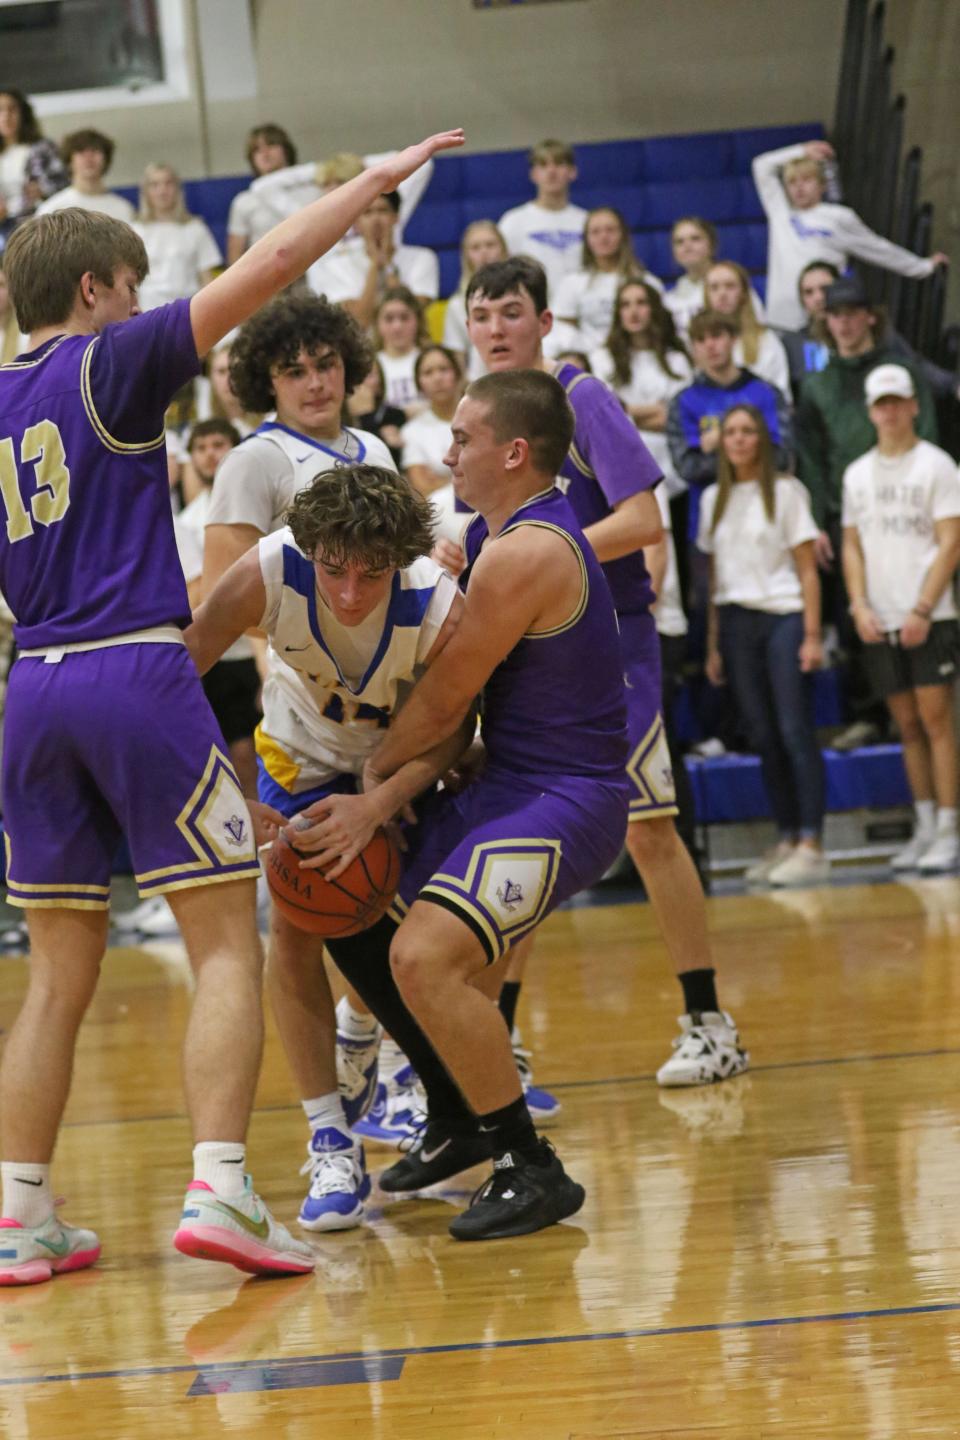 Clyde's Brennan Wilson fights for a loose ball.